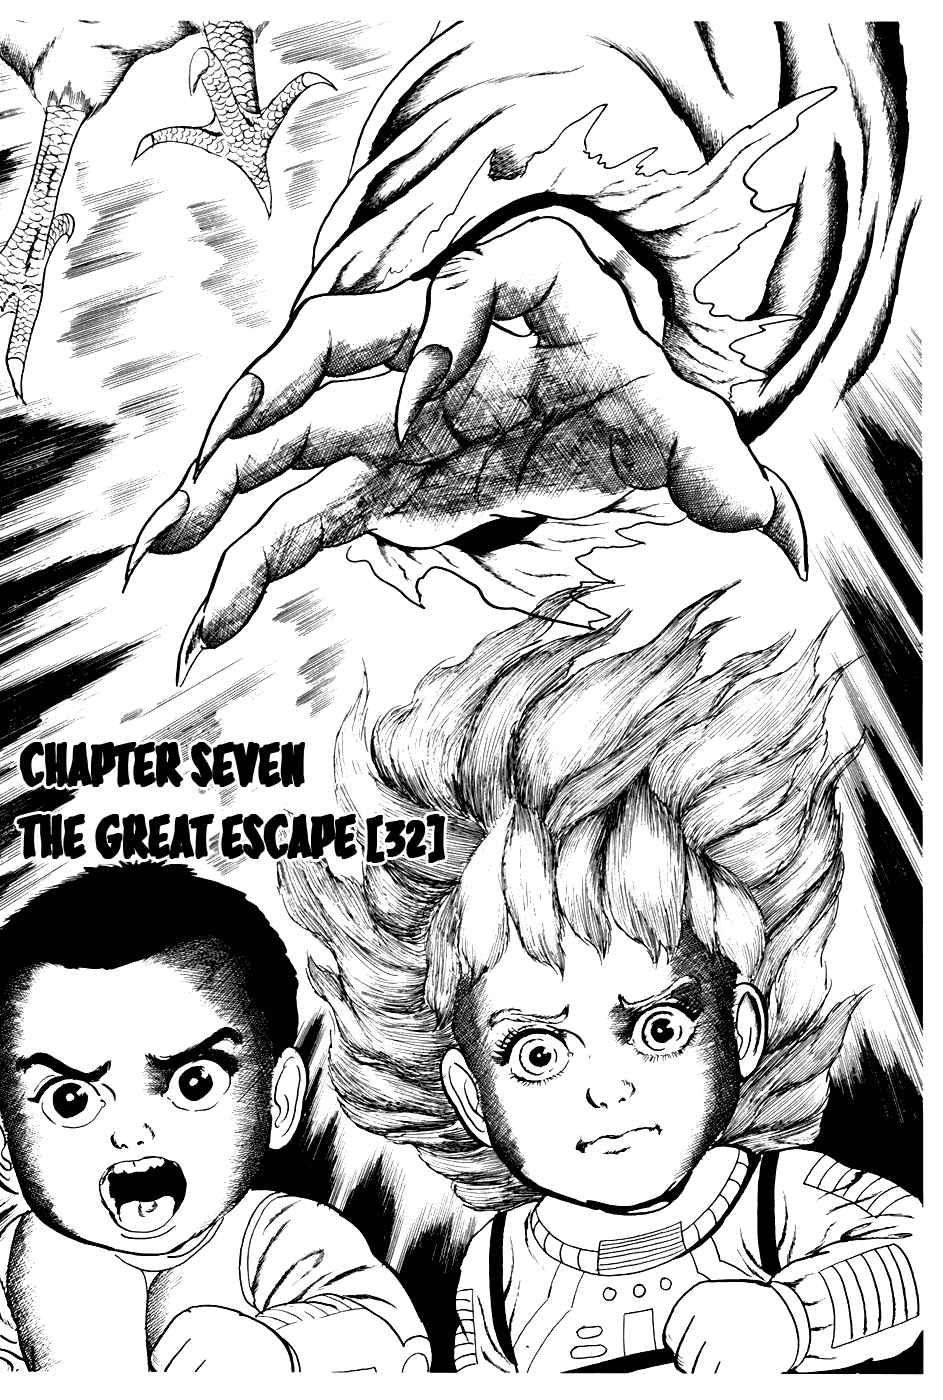 Fourteen Vol. 11 Ch. 211 The Great Escape (32)